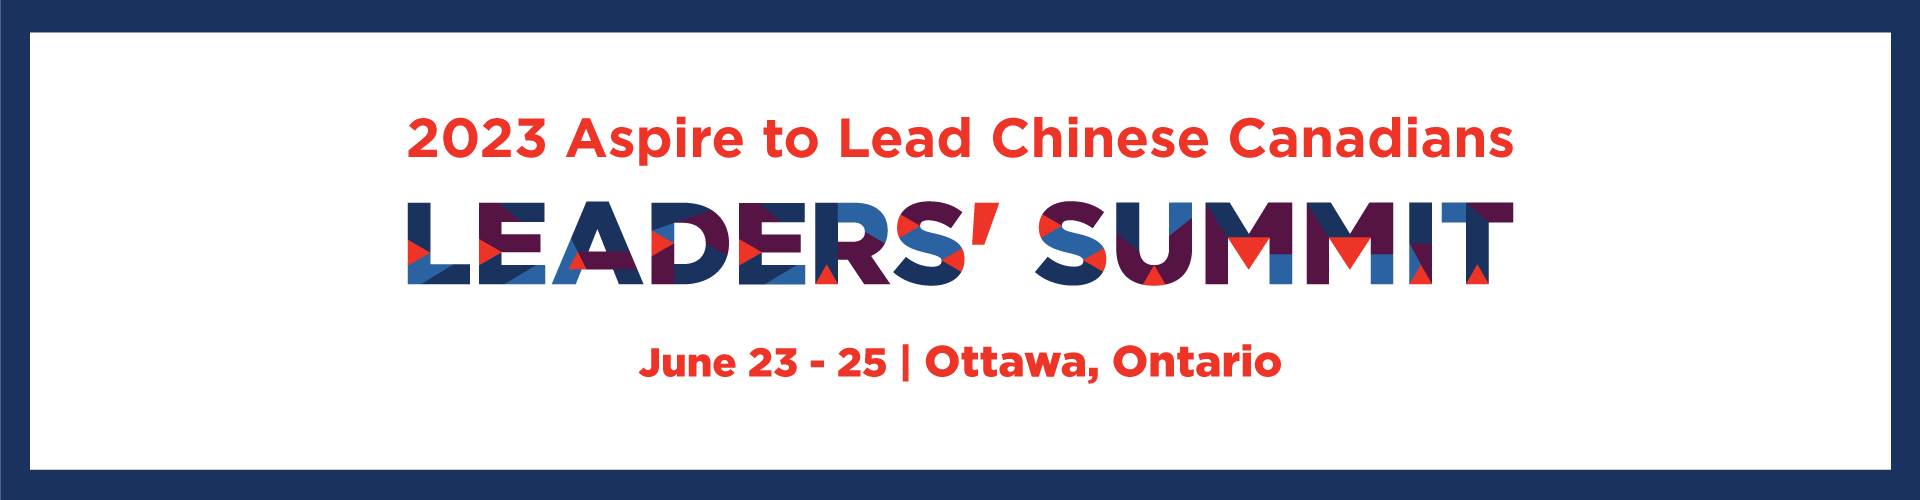 2023 Aspire to Lead Chinese Canadians Leaders' Summit | June 23-25 | Ottawa, Ontario